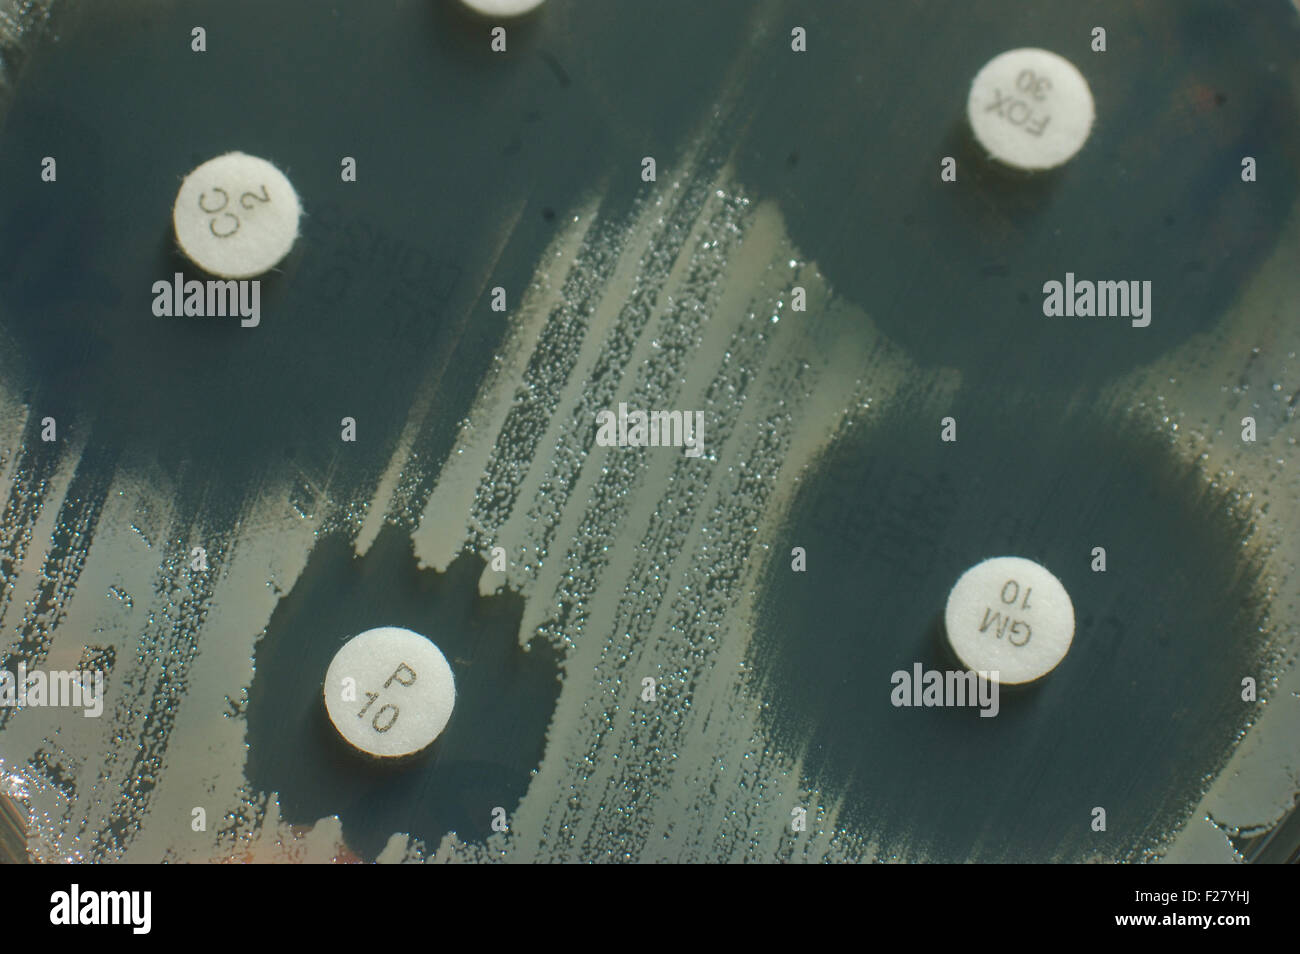 petri dish with antibiotic sensitivity discs showing inhibition zones for bacterial colonies Stock Photo